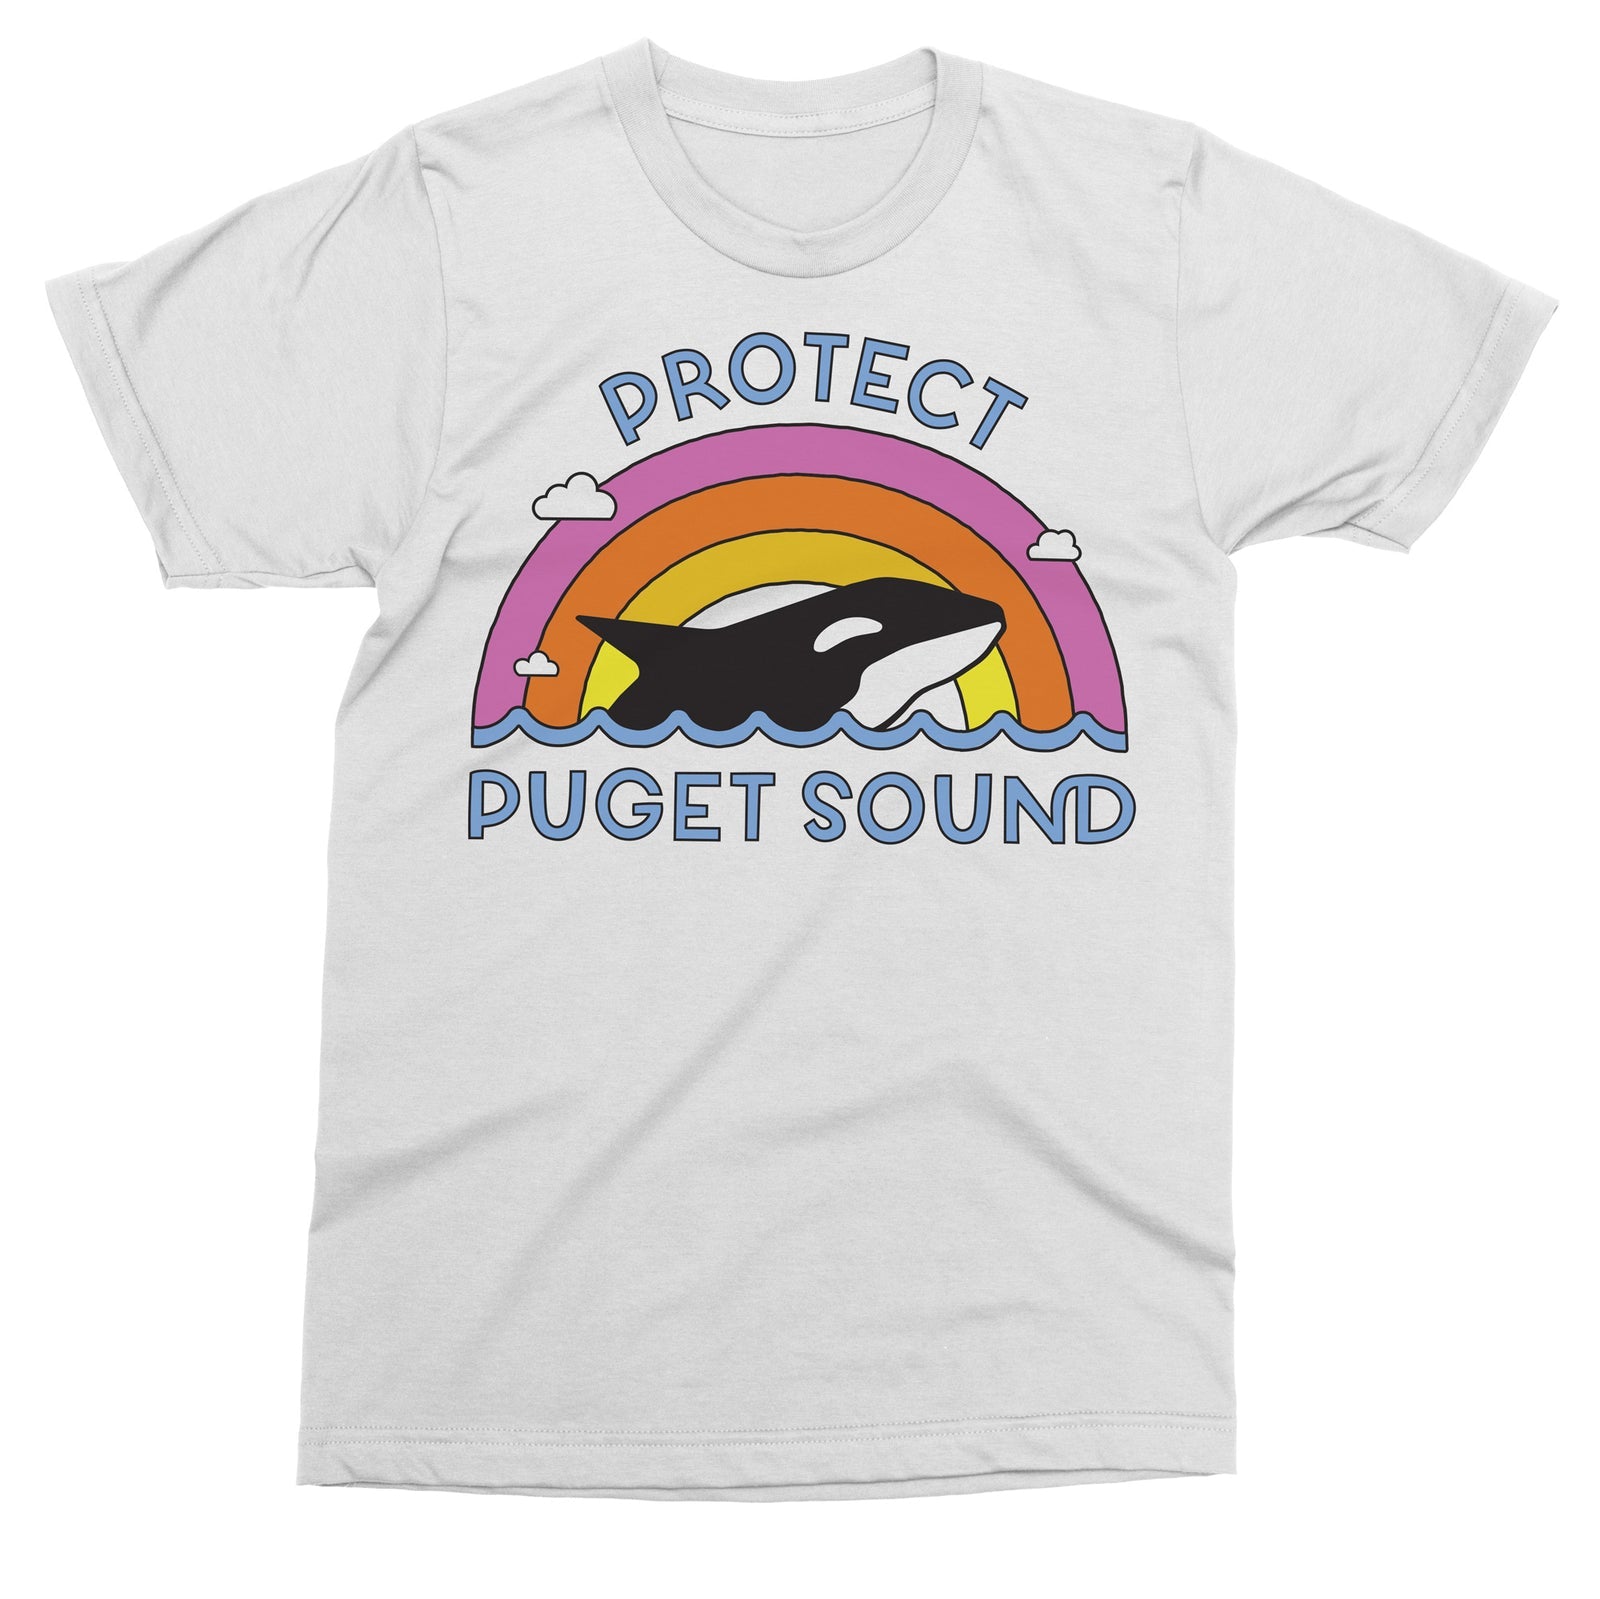 Viaduct Protect Puget Sound Tee - White